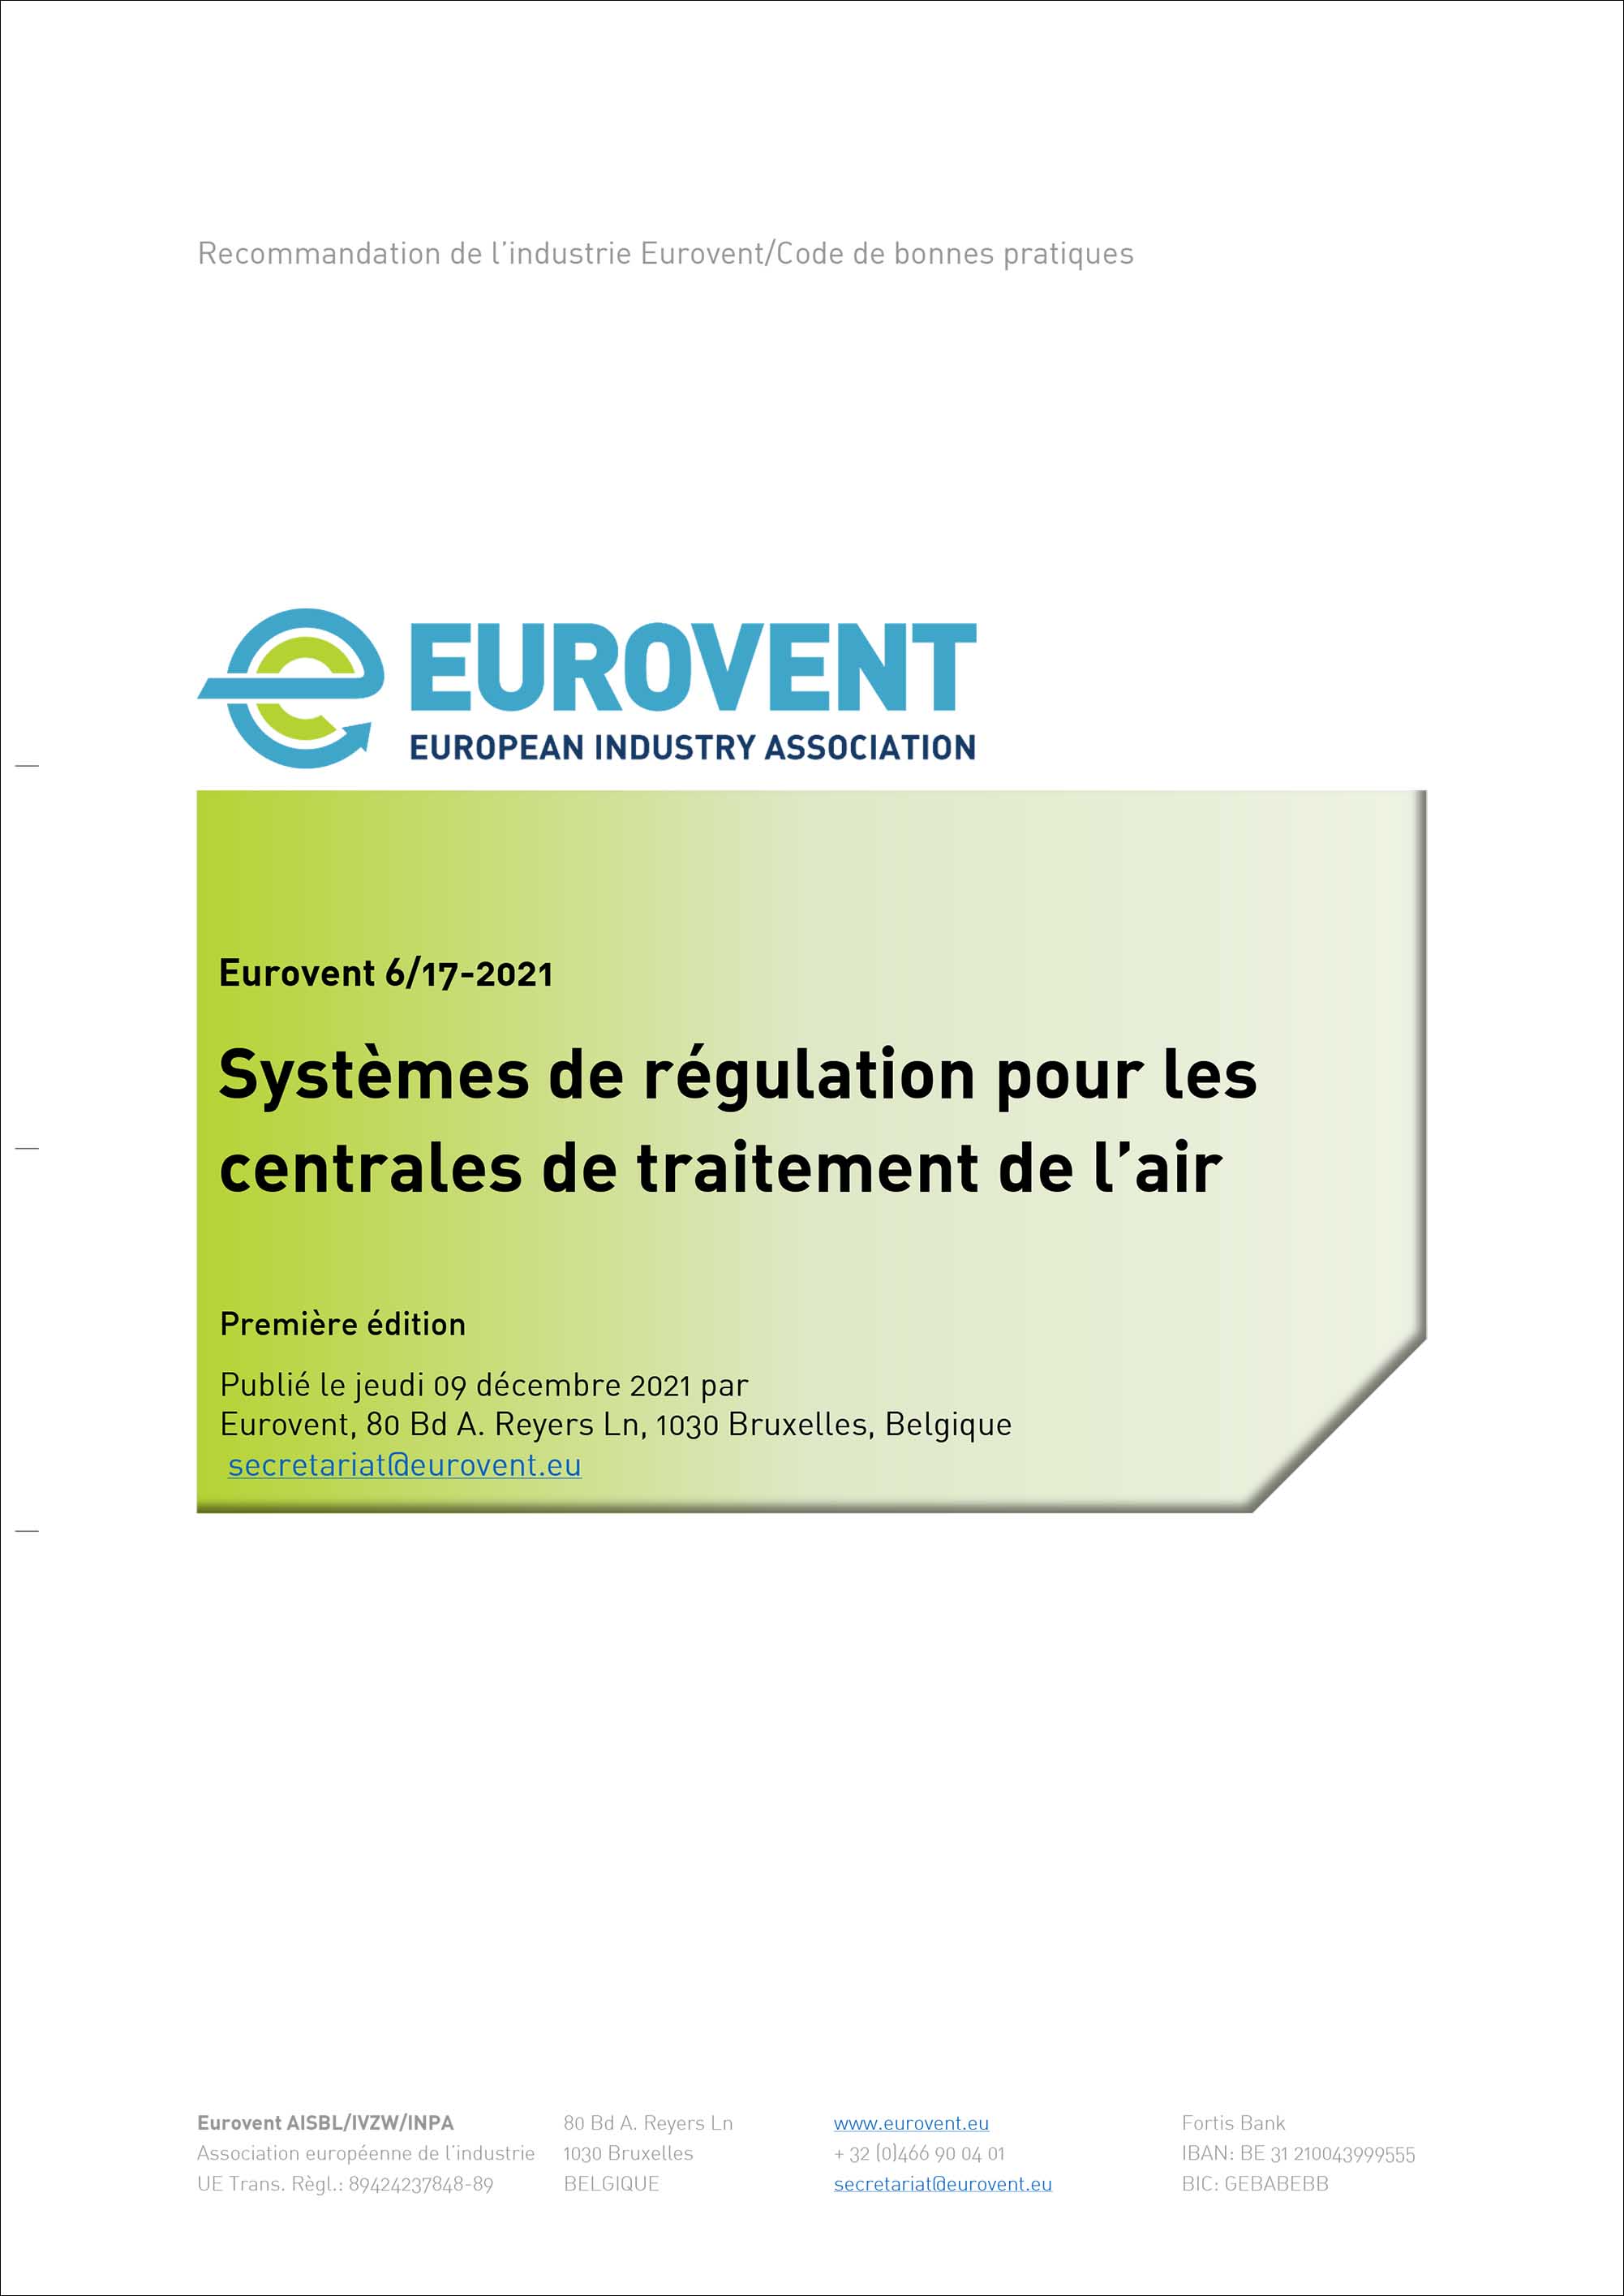 Eurovent REC 6-17 - Control Systems for Air Handling Units - 2021 - FR